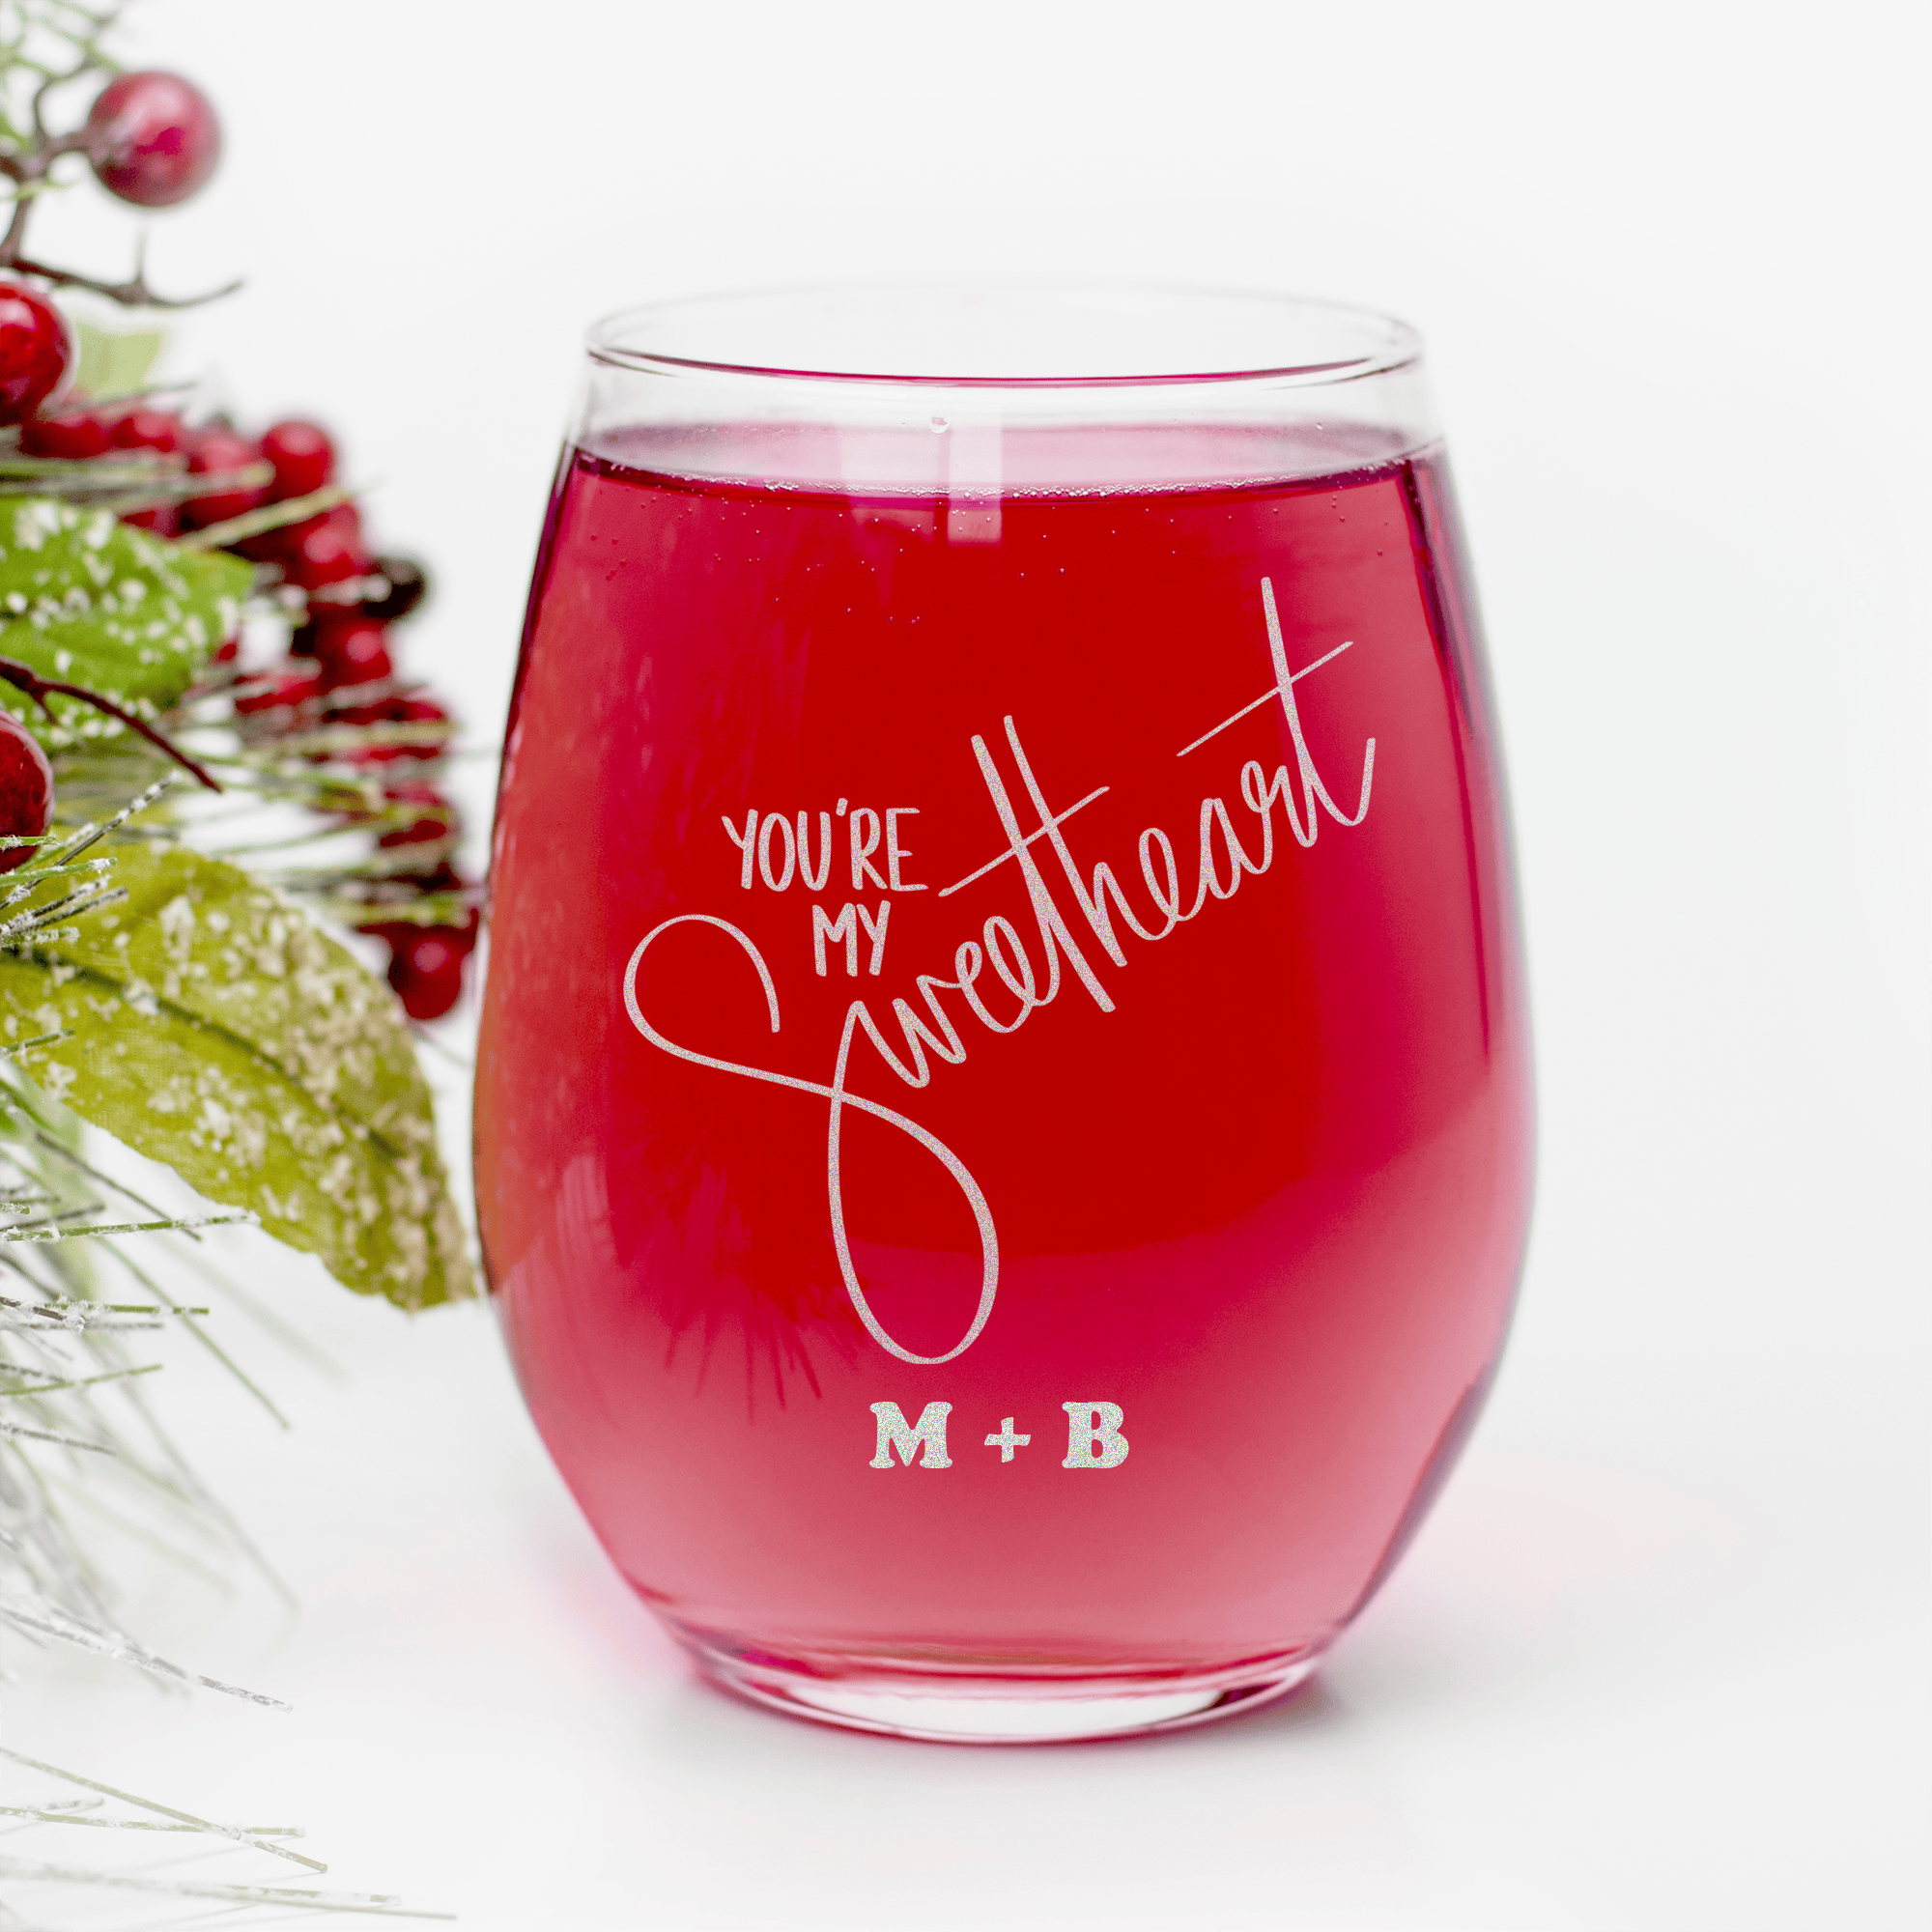 Youre My Sweetheart Stemless Wine Glass